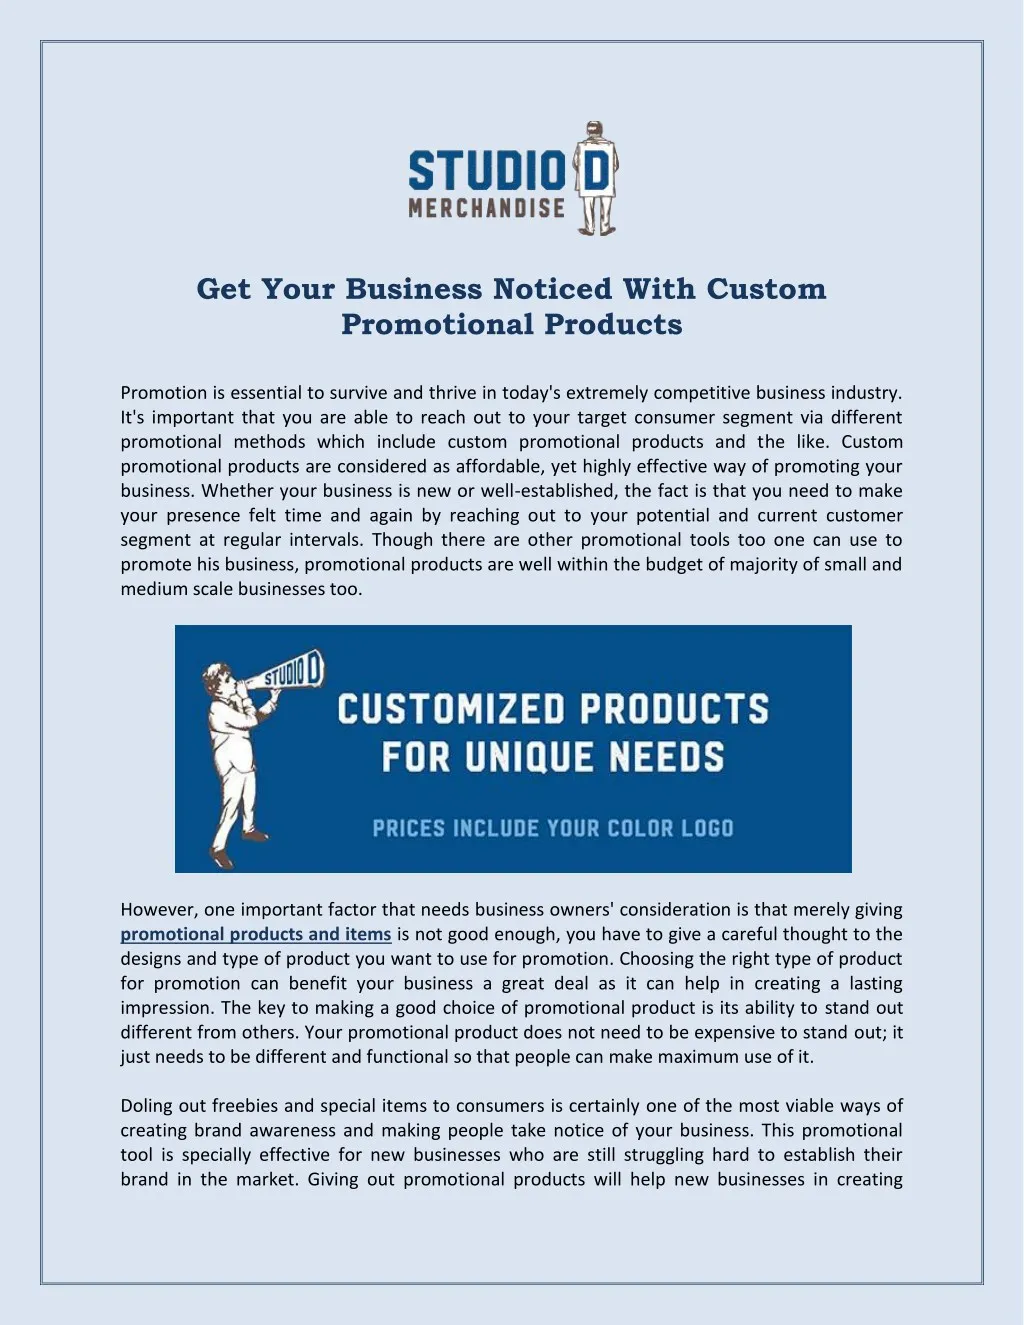 get your business noticed with custom promotional